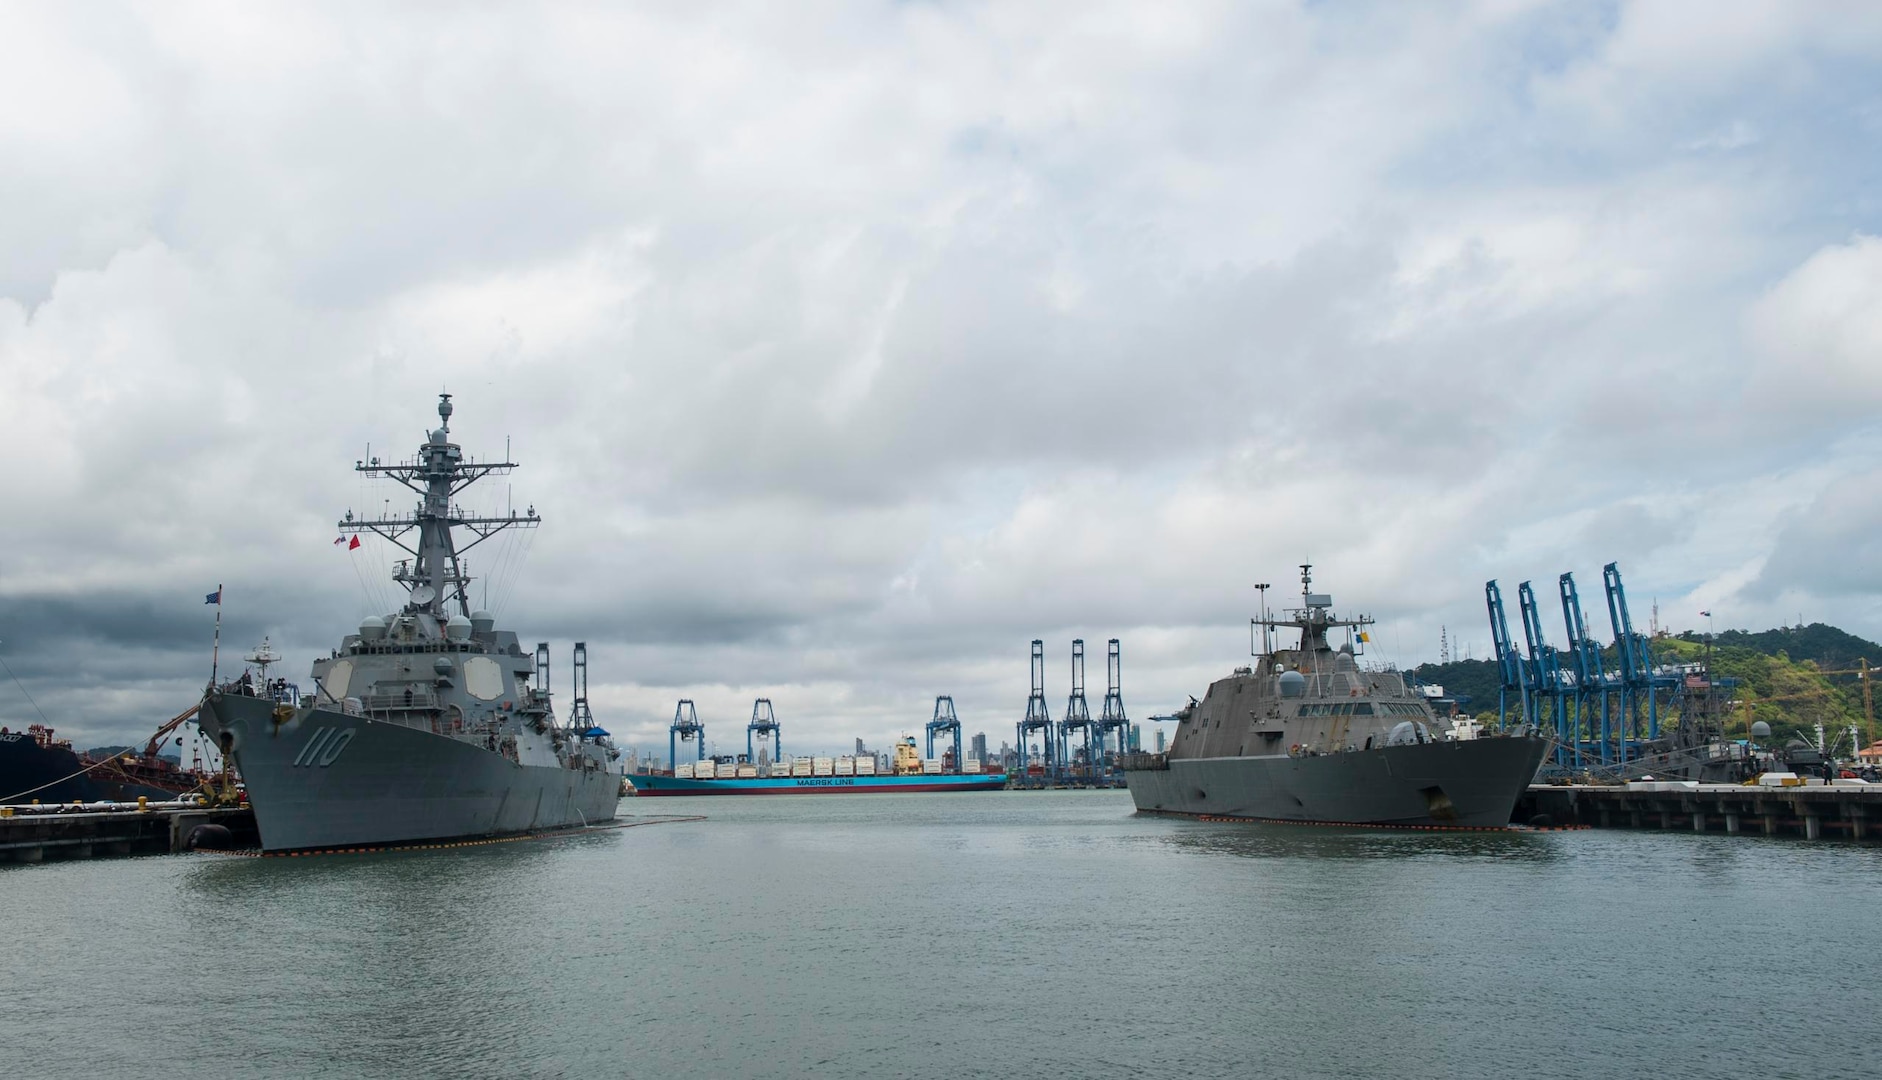 The Cyclone-class coastal patrol ship USS Tornado (PC 14), Arleigh Burke-class guided missile destroyer USS William P. Lawrence (DDG 110) and the Freedom-variant littoral combat ship USS Detroit (LCS 7) moored pierside in Vasco Nunez de Balboa